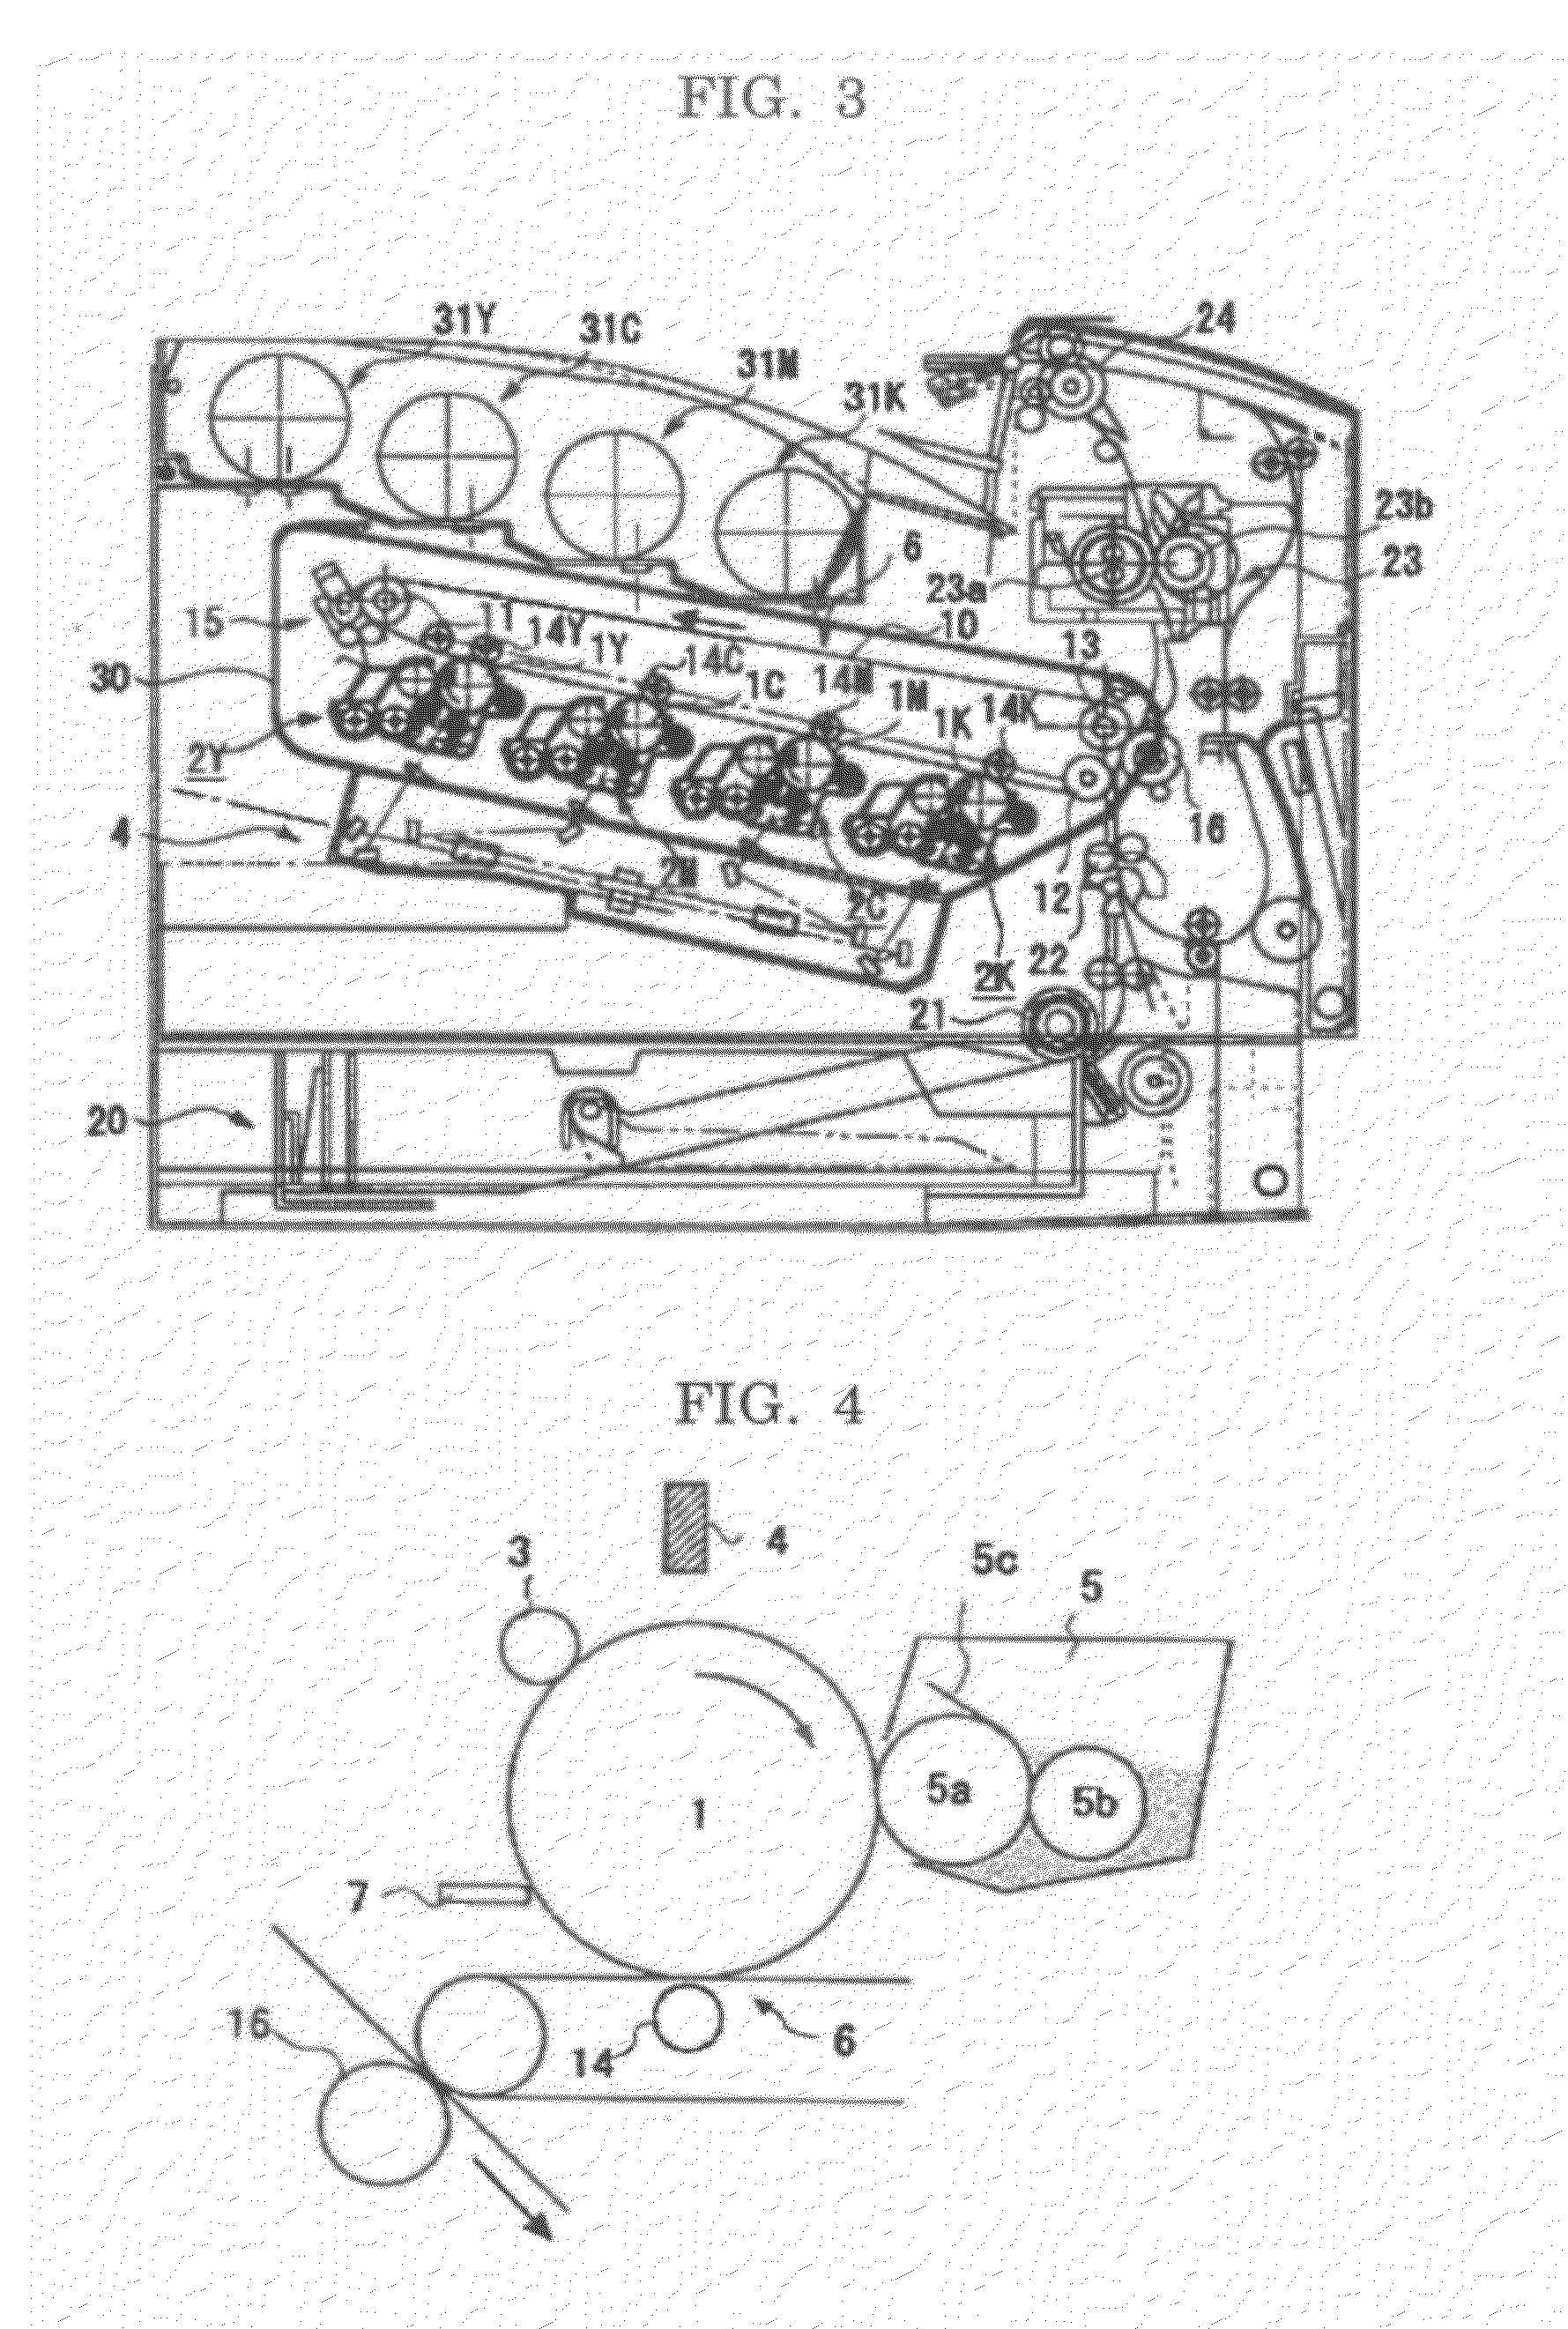 Toner, image forming method, image forming apparatus, and process cartridge